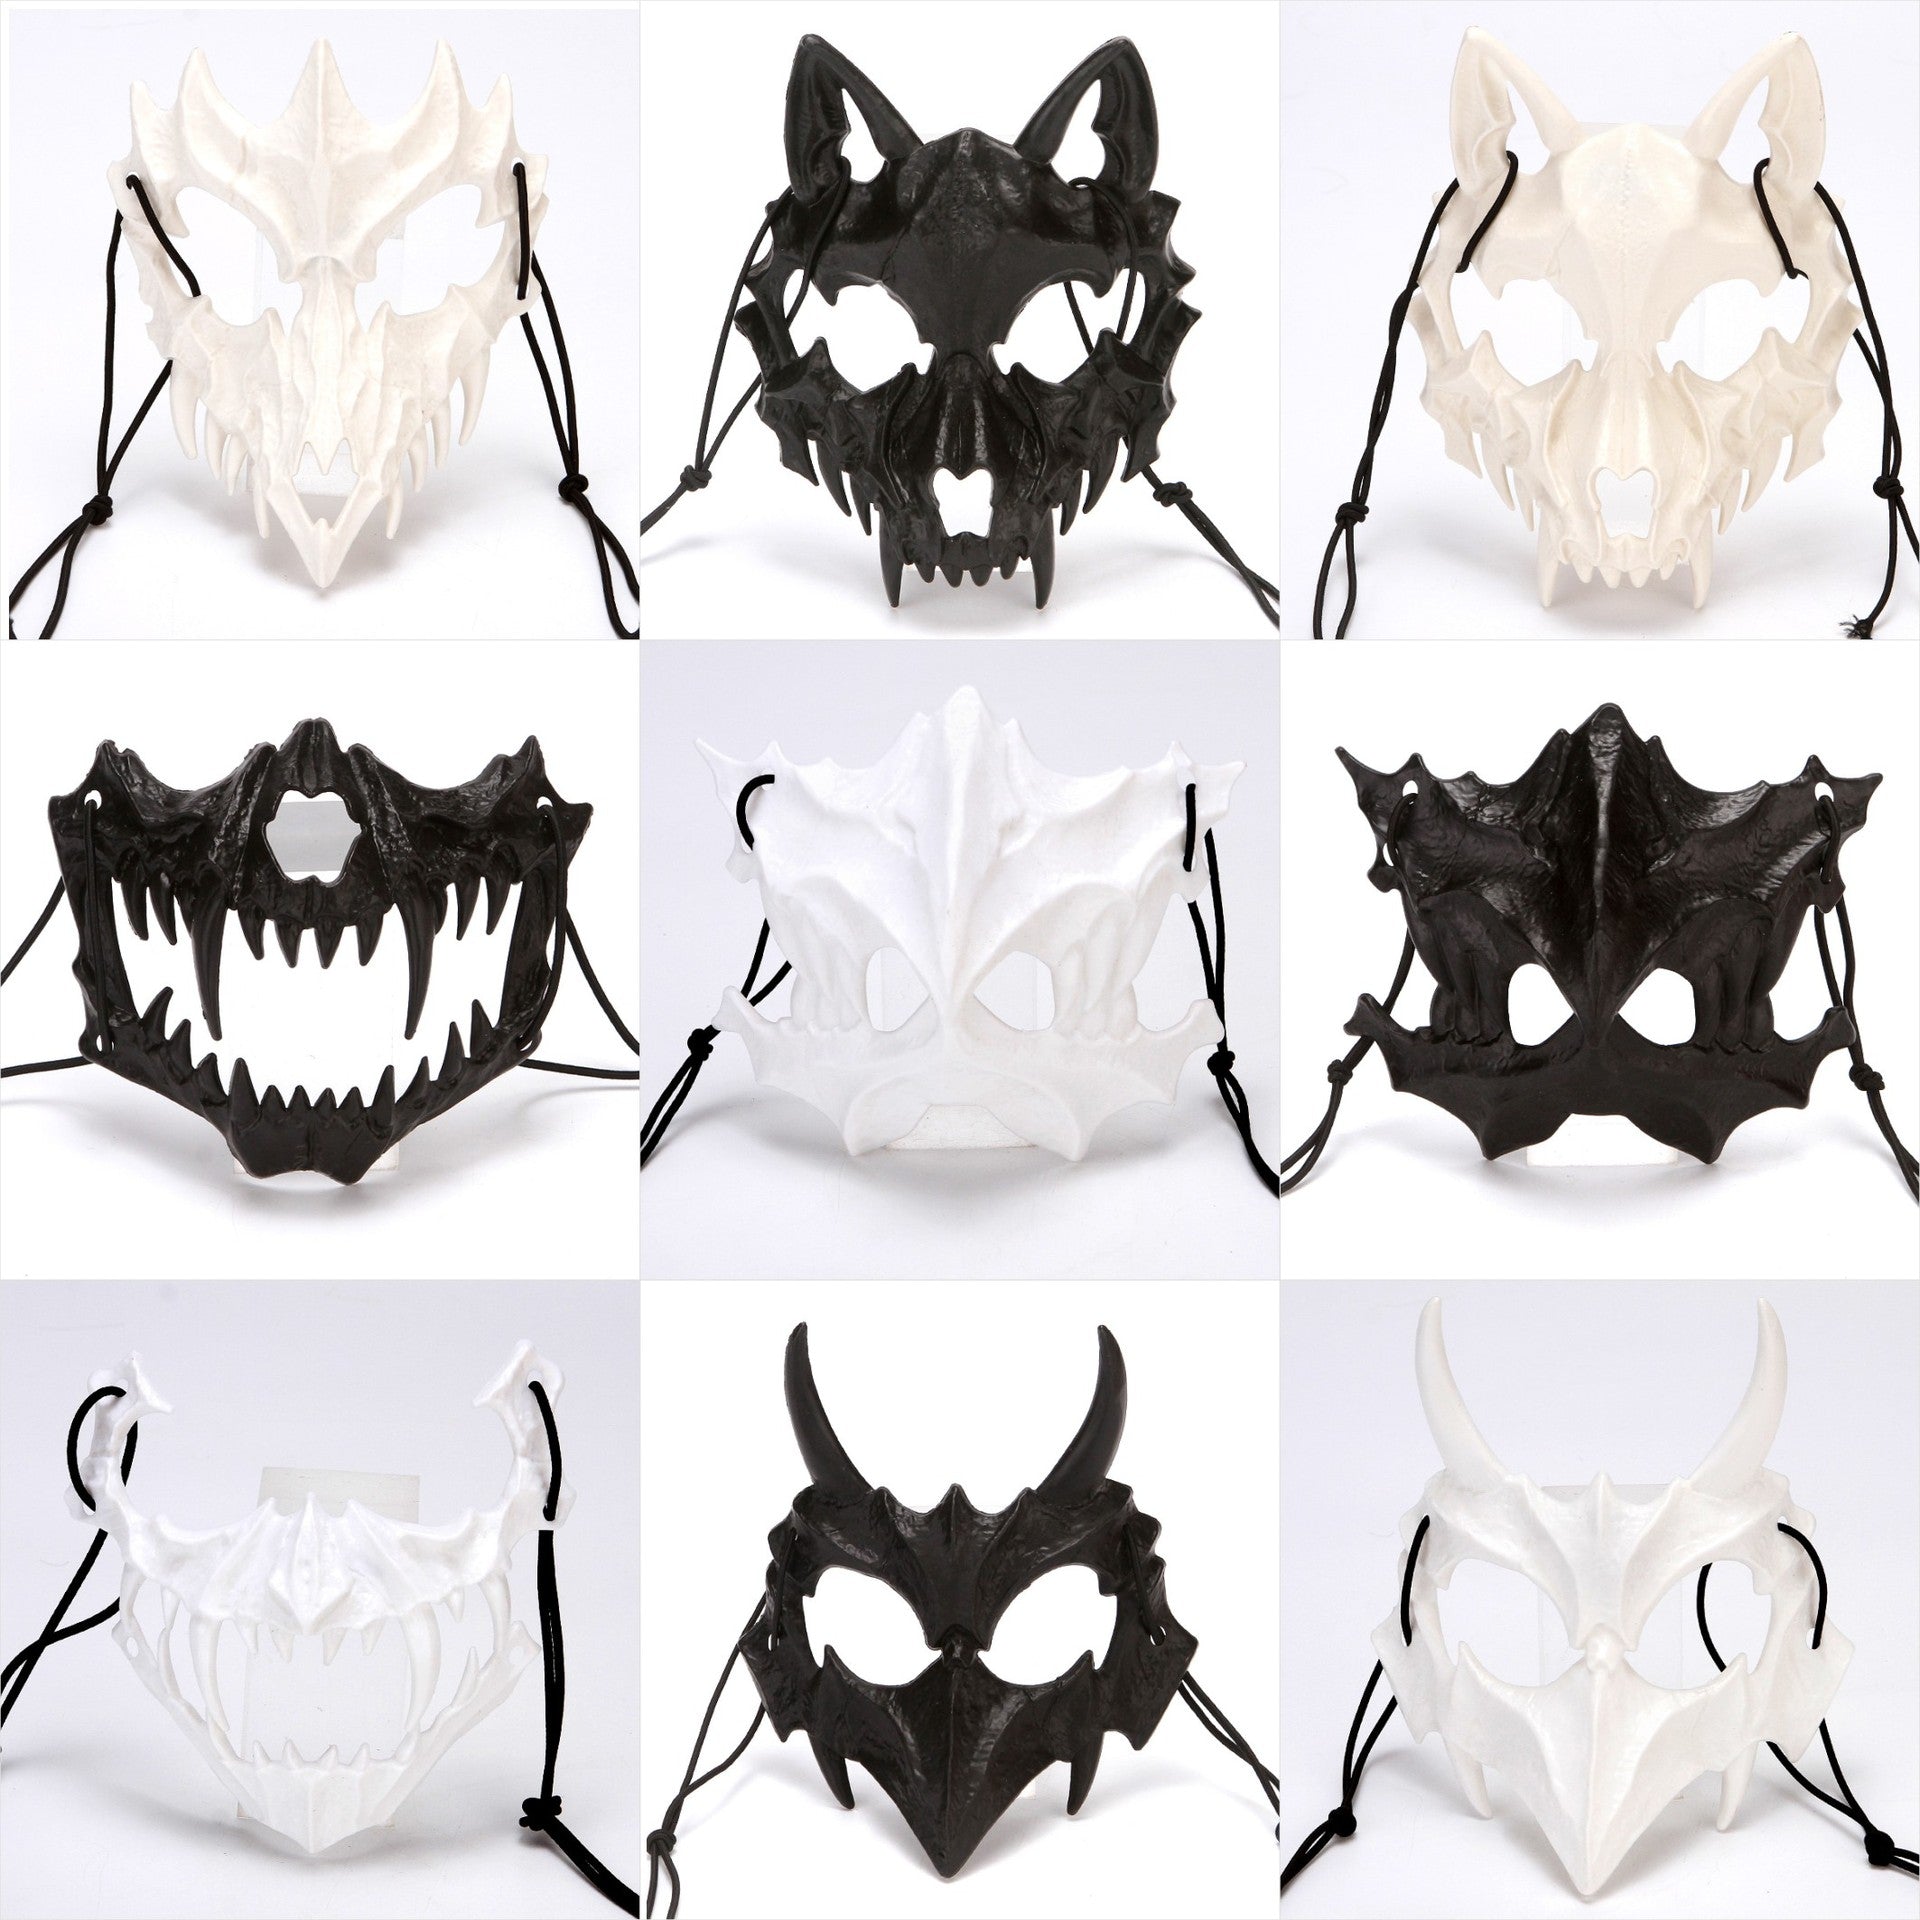 Halloween Two-dimensional Dress Up Props Mask, Halloween Masks, Halloween Mask For Men, Halloween Masks for Women